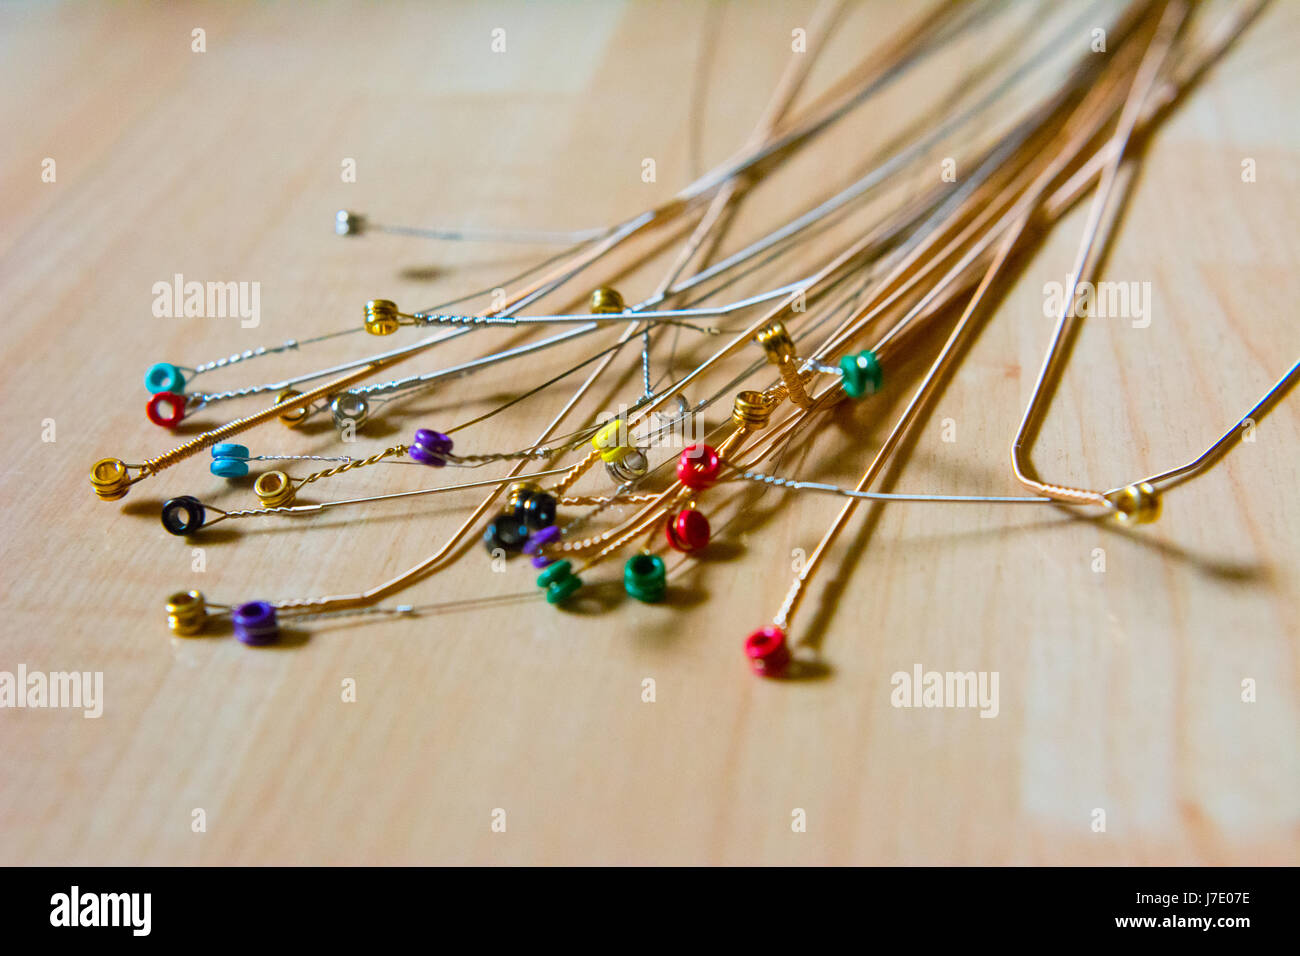 An assortment of used electric guitar strings on a wooden surface left over after replacing several sets of strings. Stock Photo